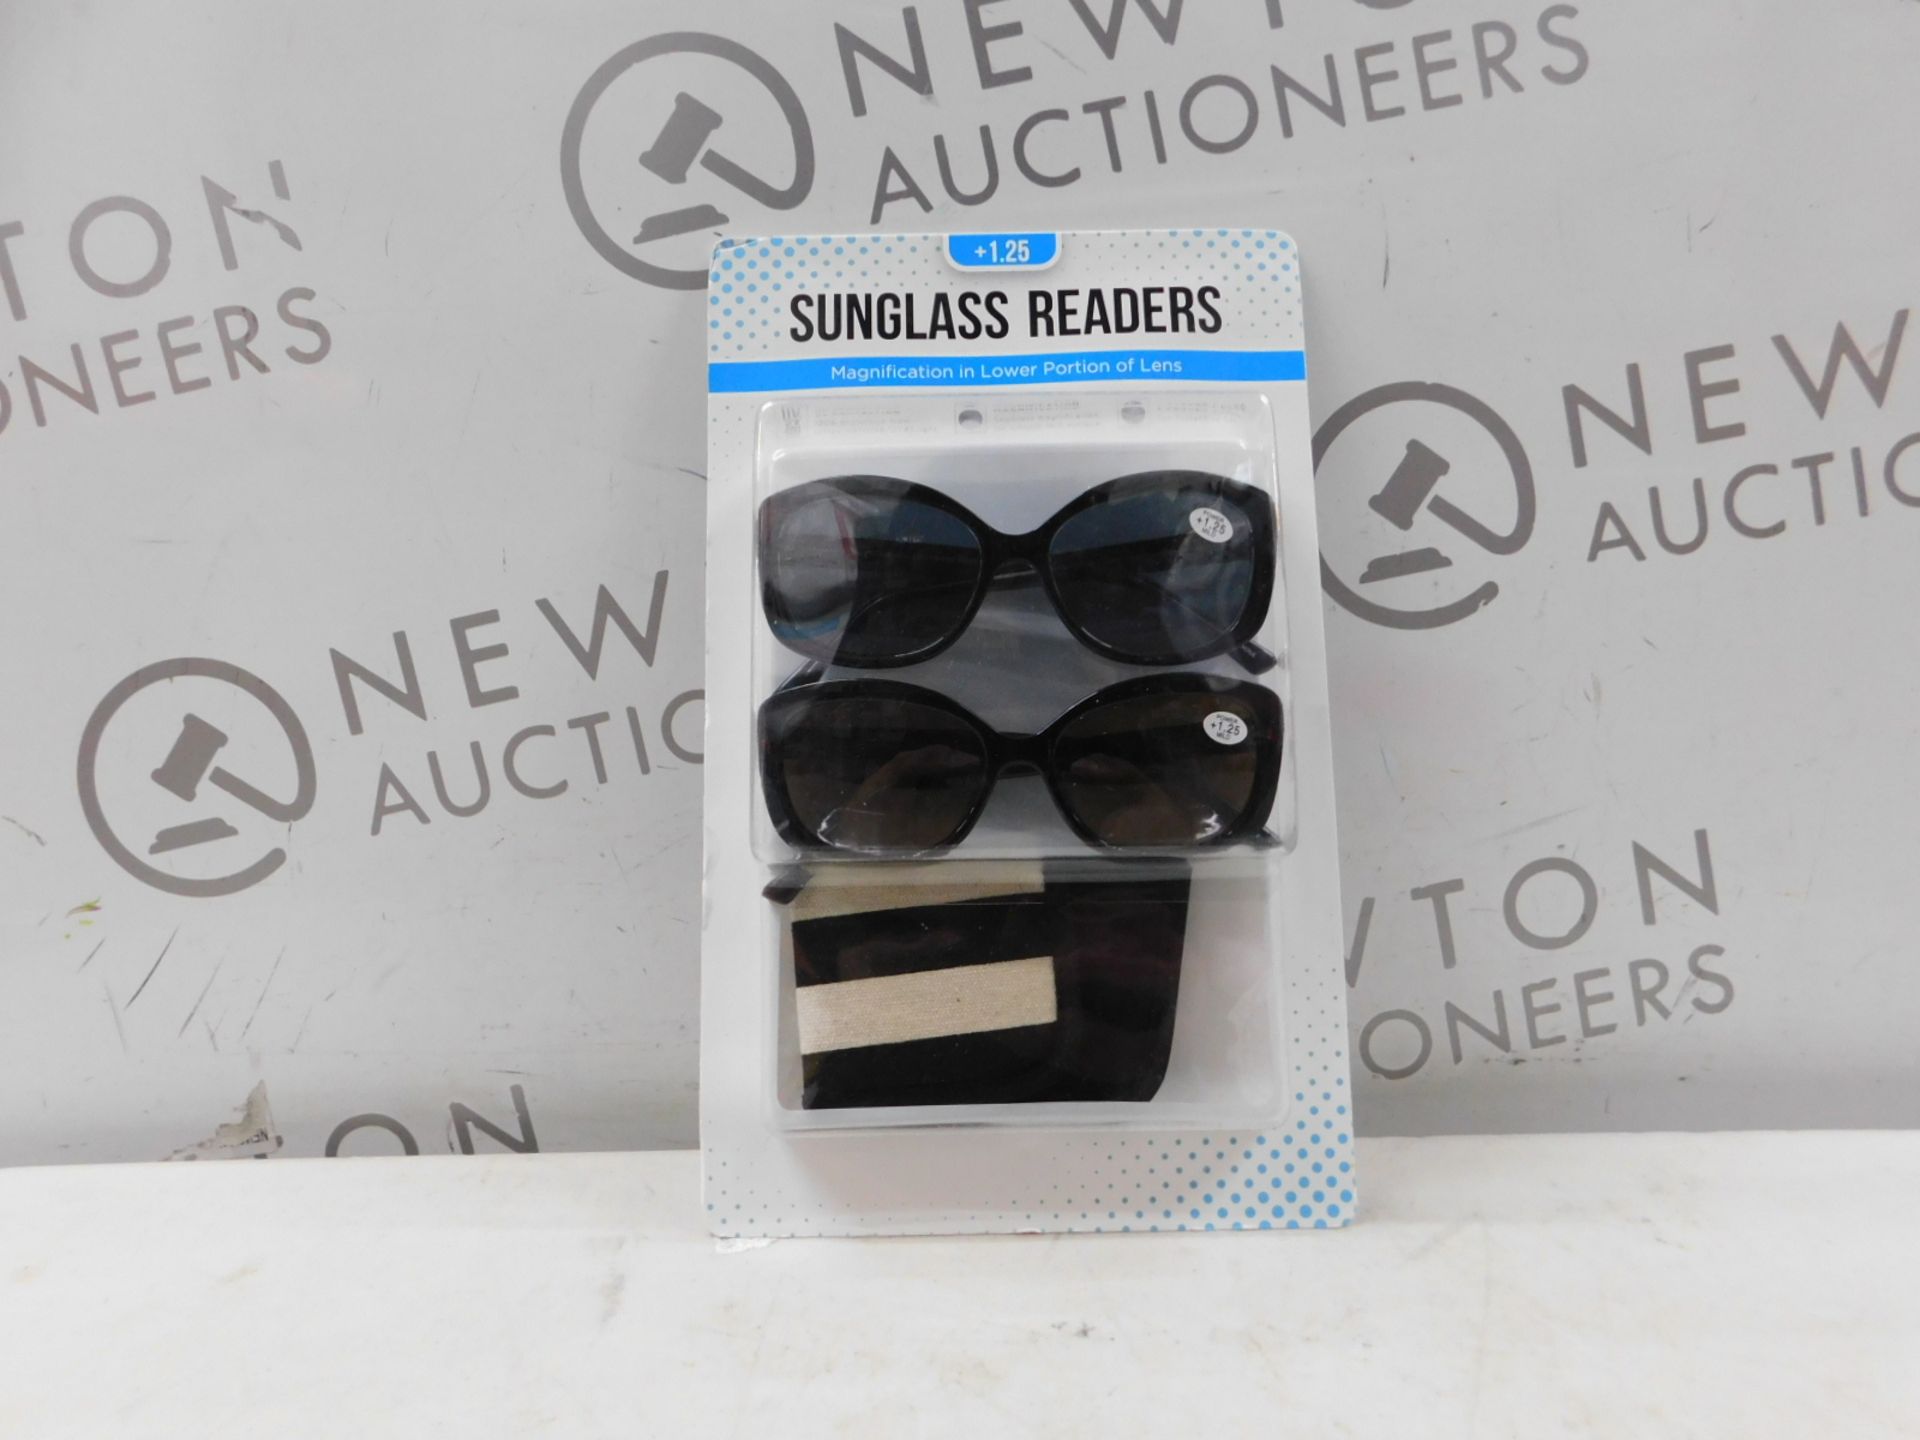 1 BRAND NEW PACK OF SUNGLASS READERS IN +1.25 STRENGTH RRP Â£19.99